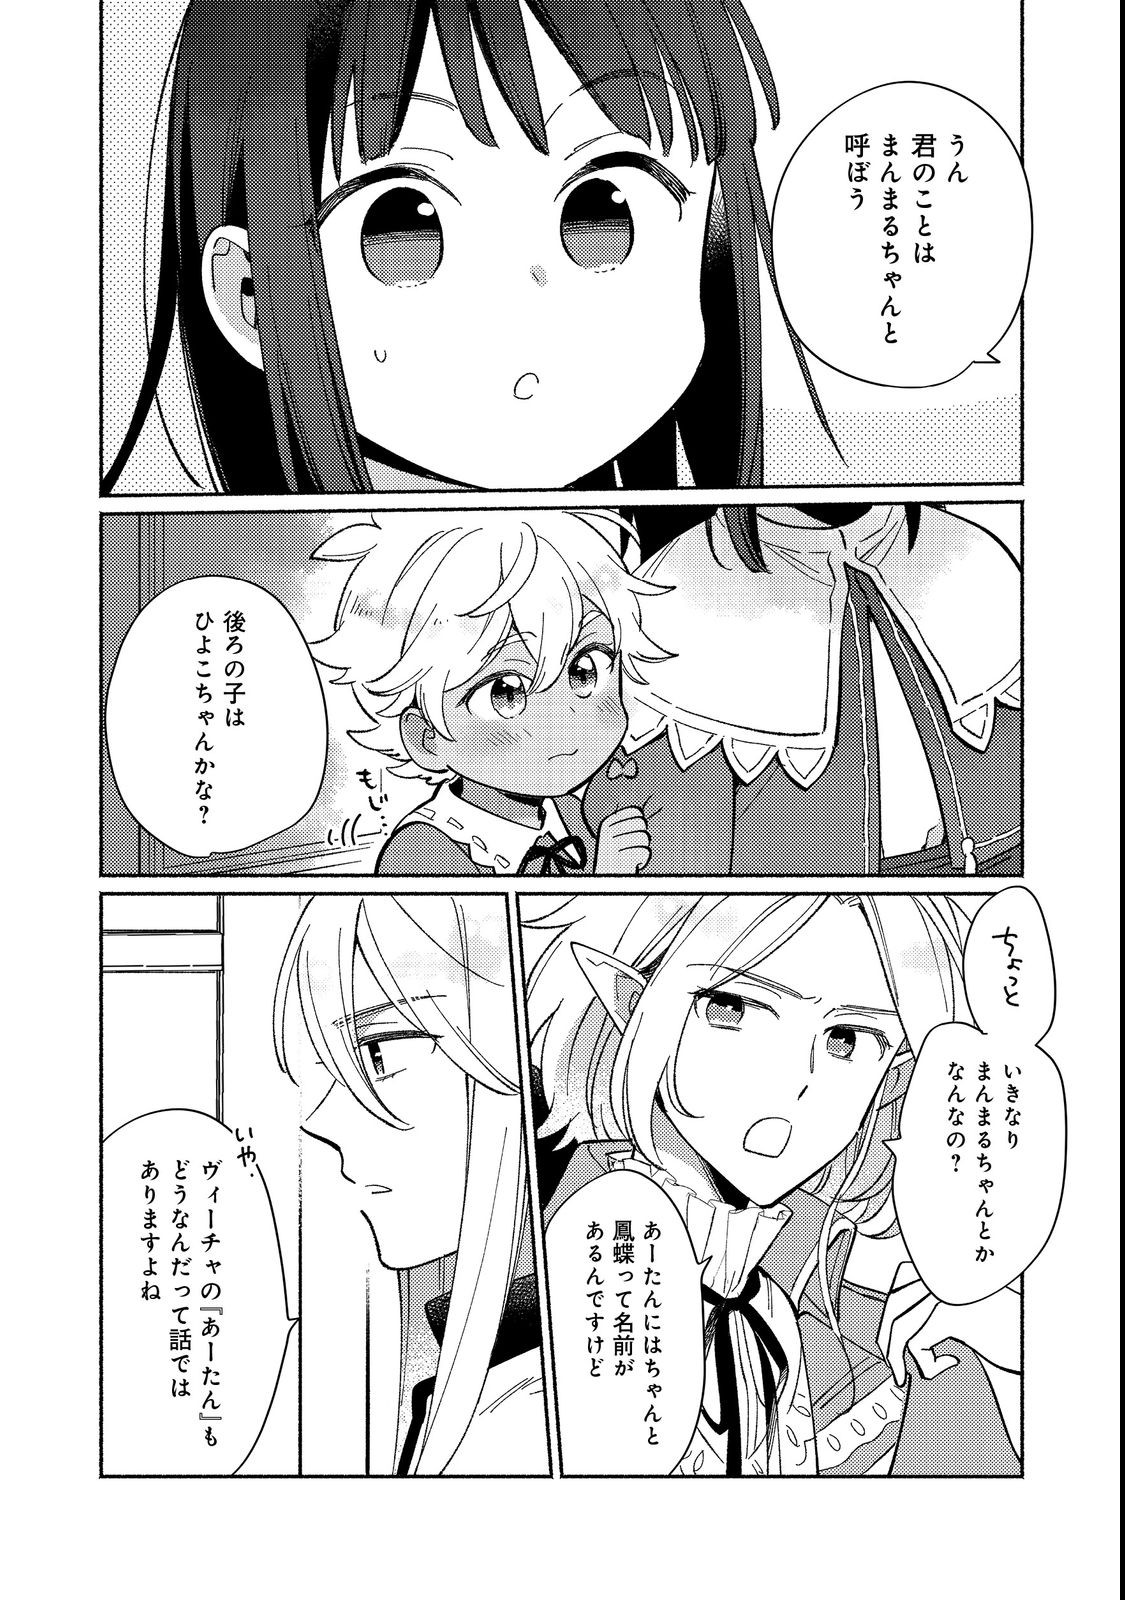 I’m the White Pig Nobleman 第17.1話 - Page 6